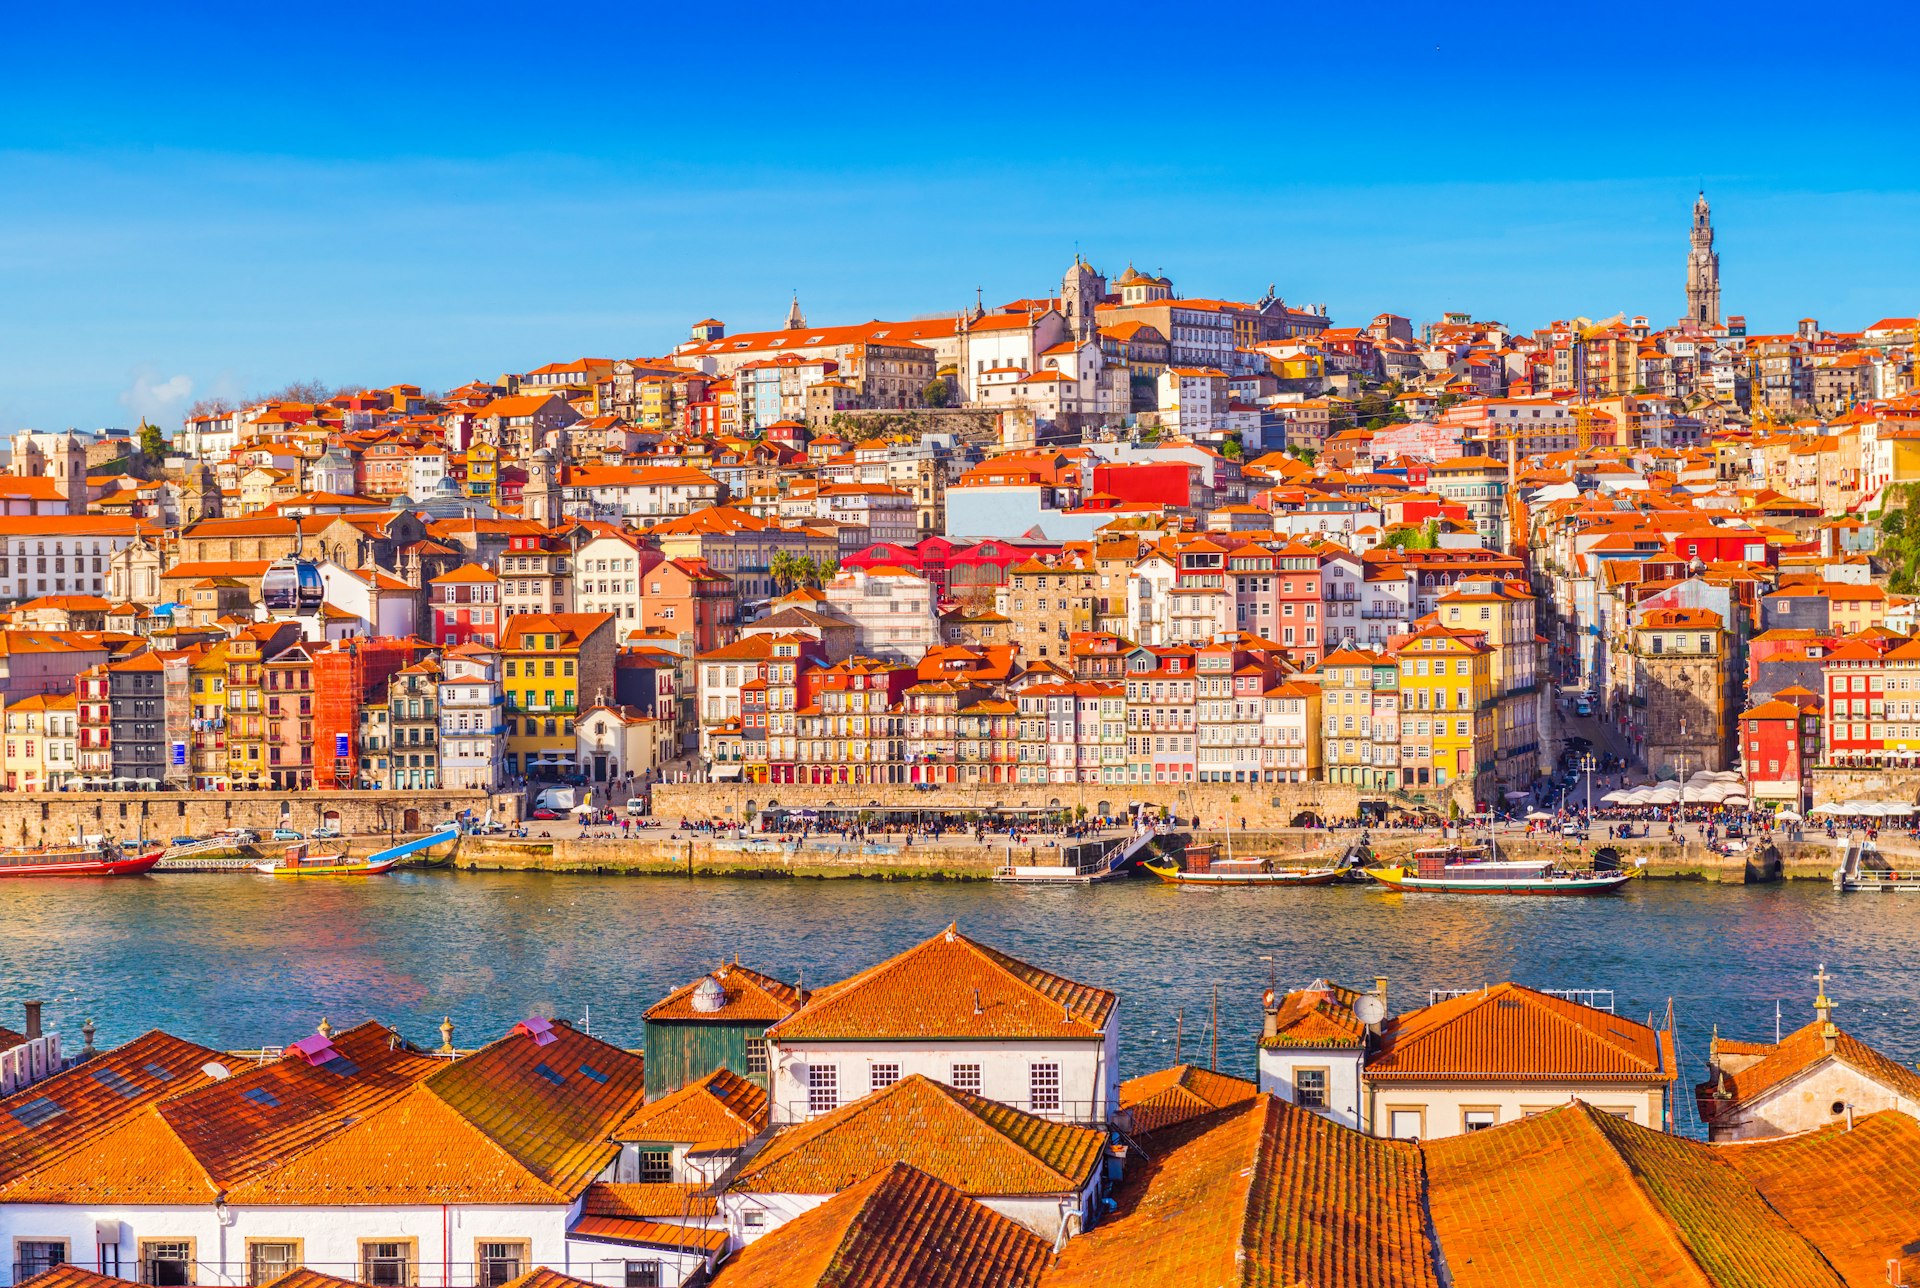 A panoramic view of the old city centre of Porto in Portugal, with scenic old buildings lining the river.